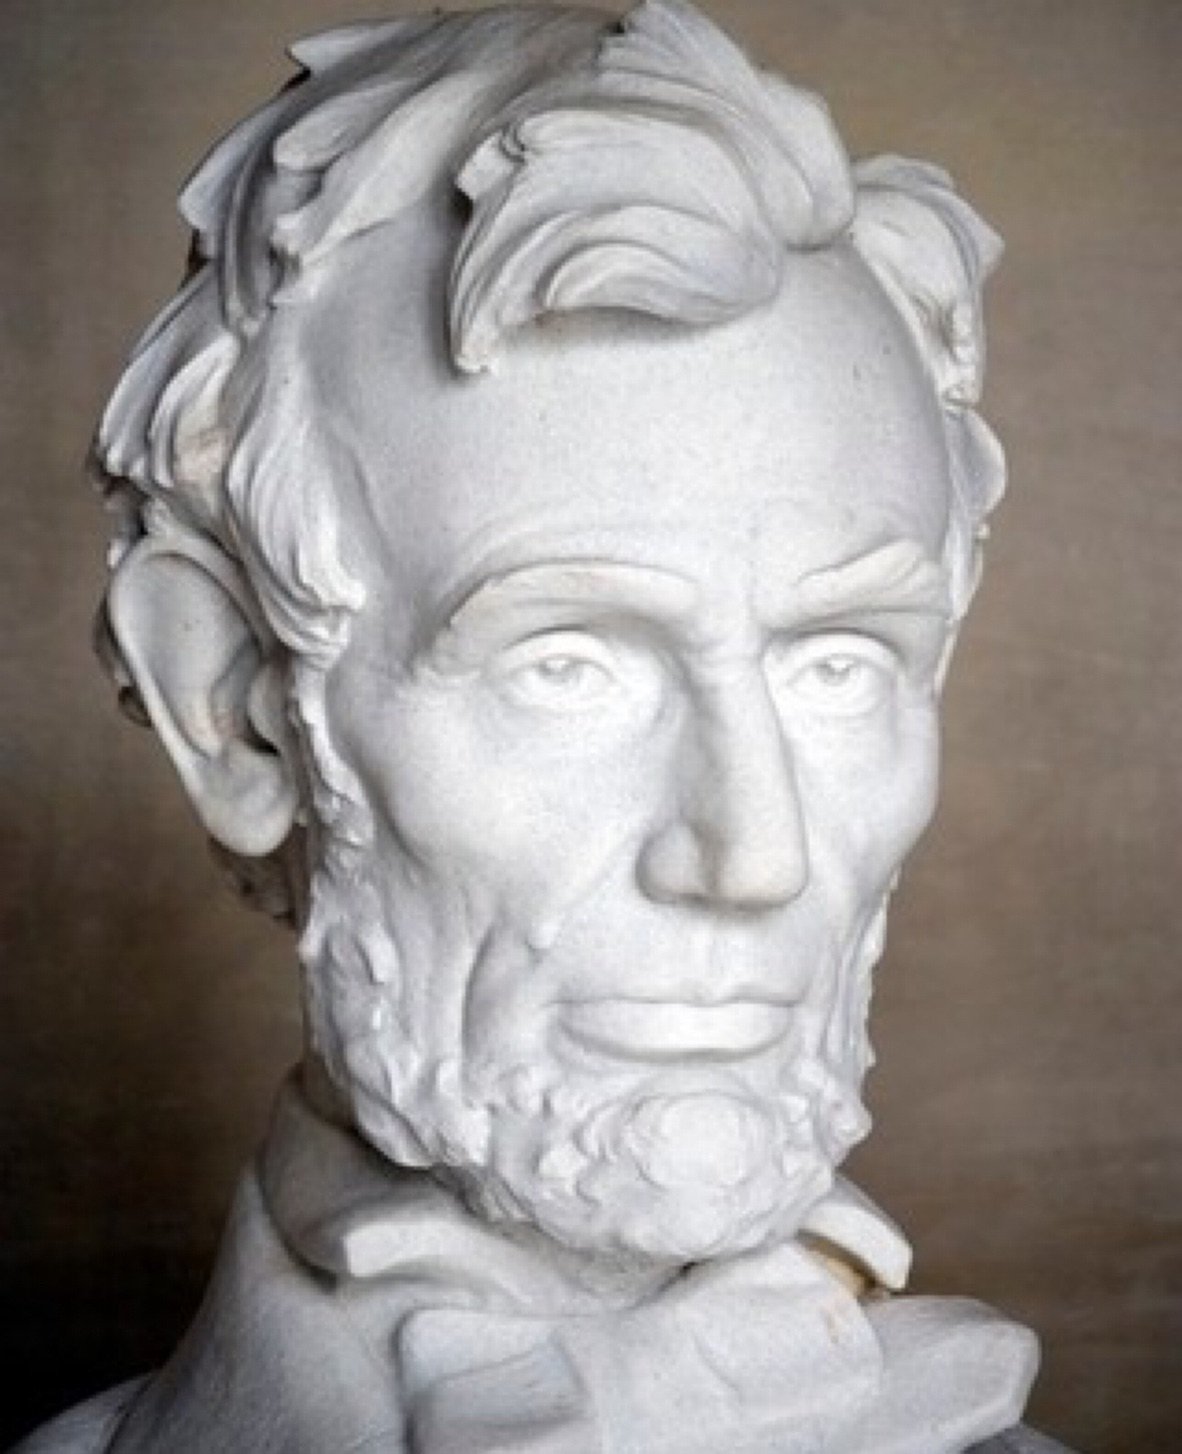 On this day in history, April 15, 1865, President Abraham Lincoln died after he was fatally shot the night before while he and his wife were attending a play at Ford&rsquo;s Theatre. 

At the time, Daniel Chester French was just shy of his 15th birth